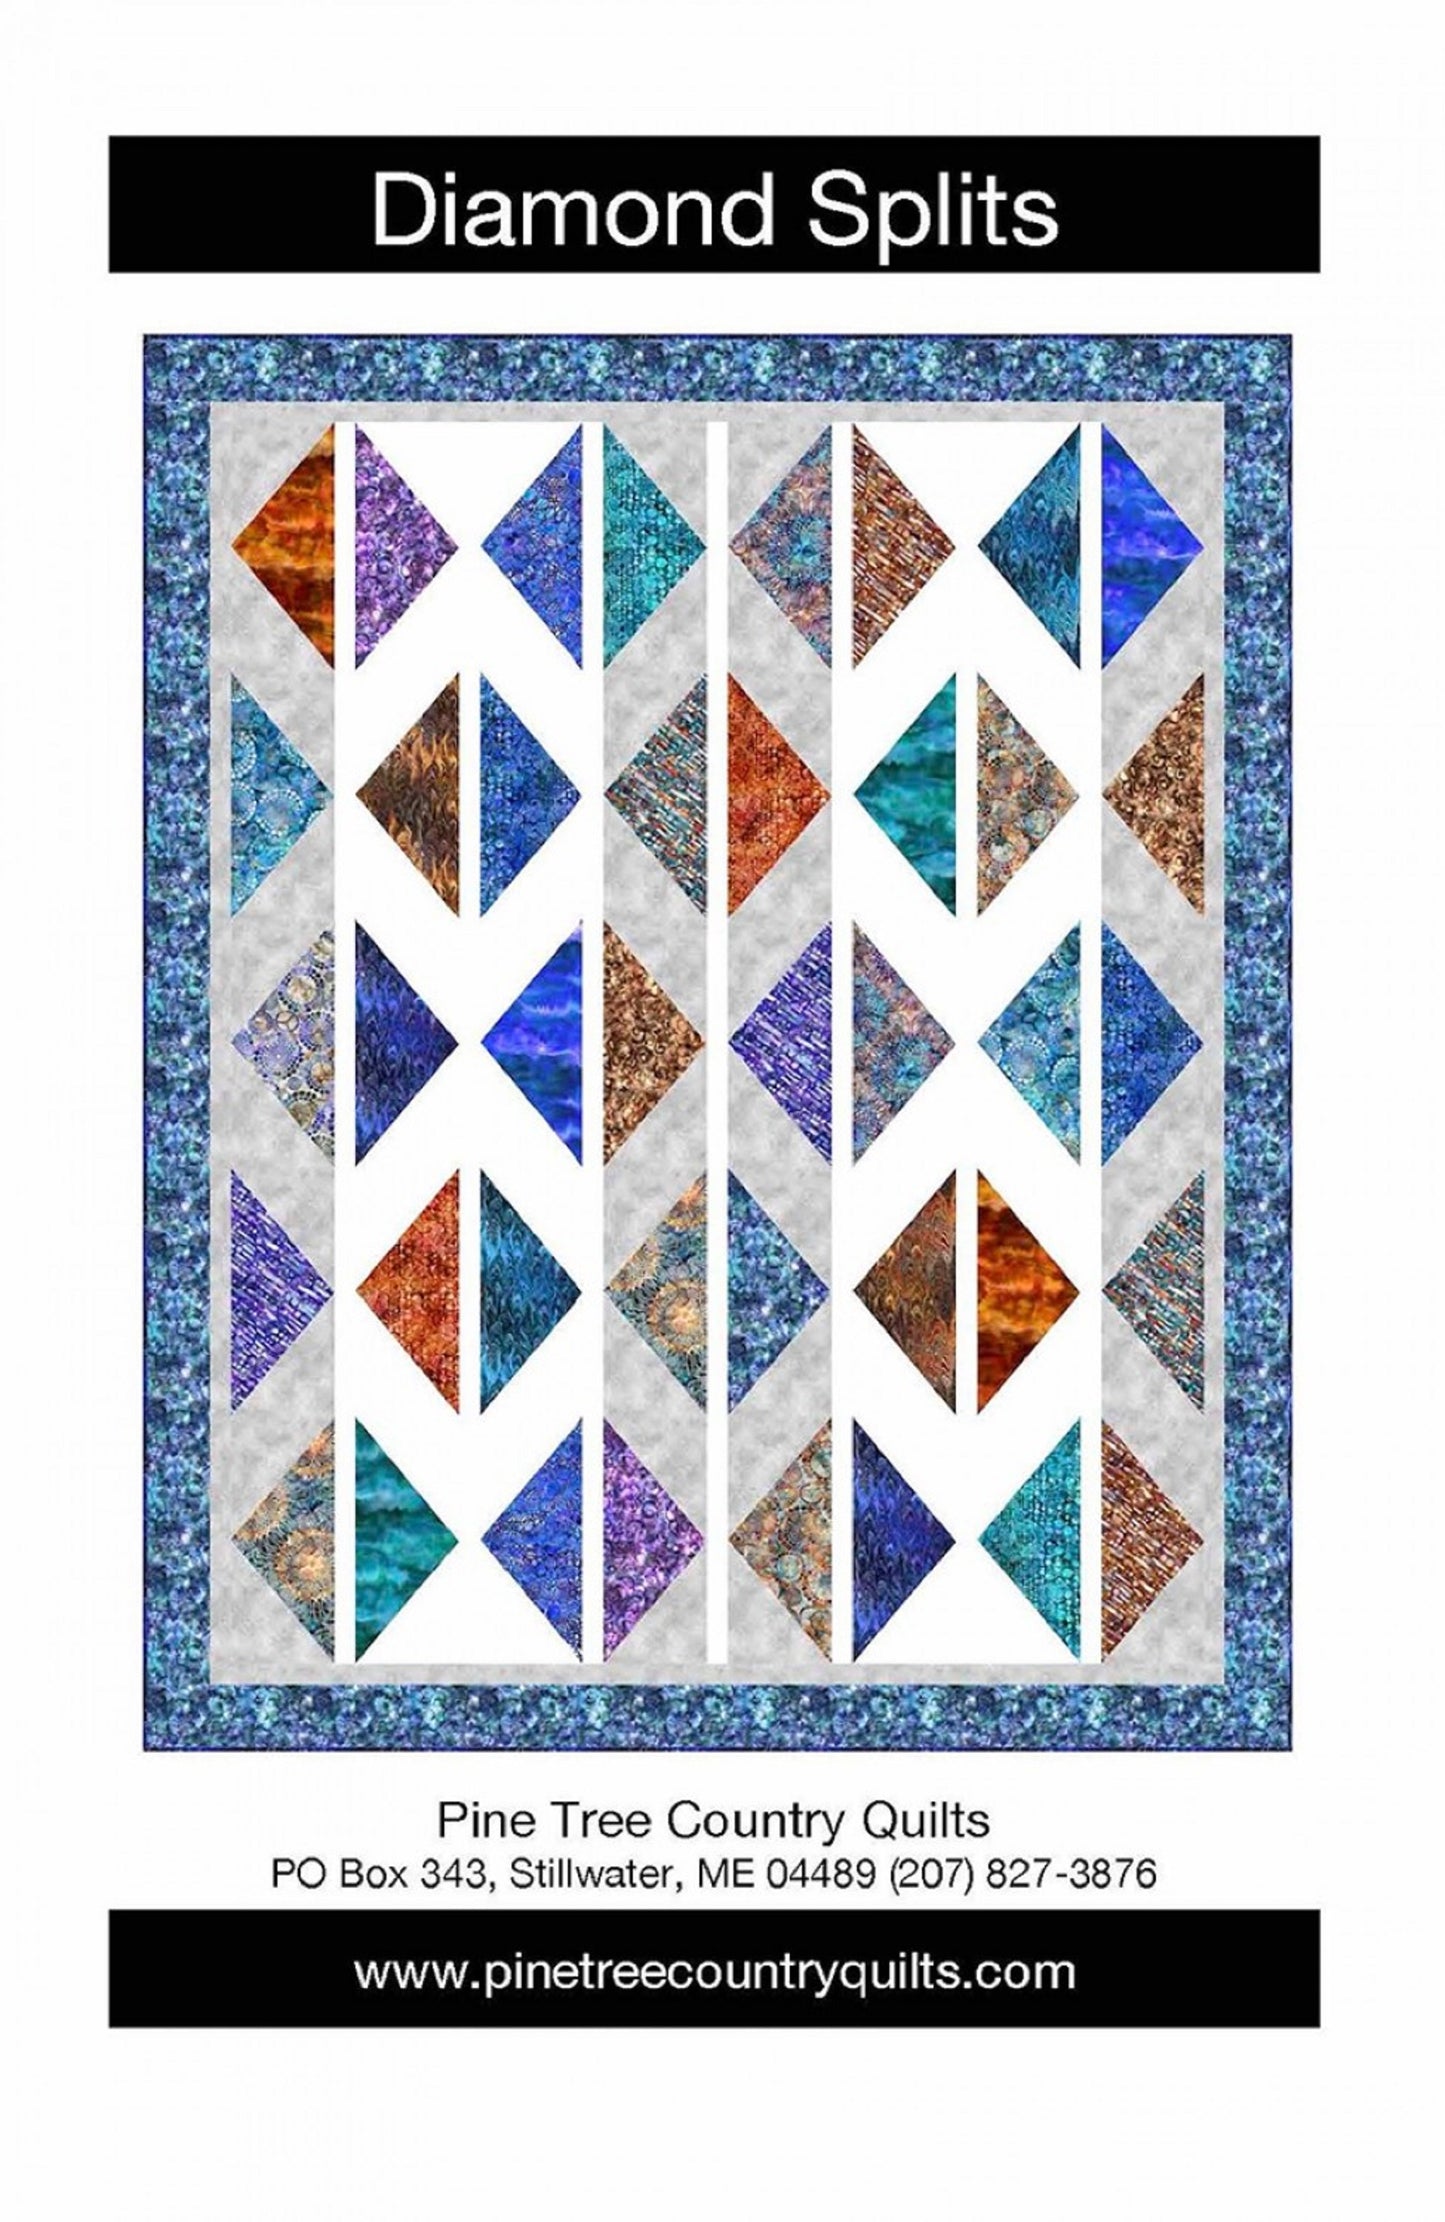 Diamond Splits Pattern by Pine Tree Country Quilts